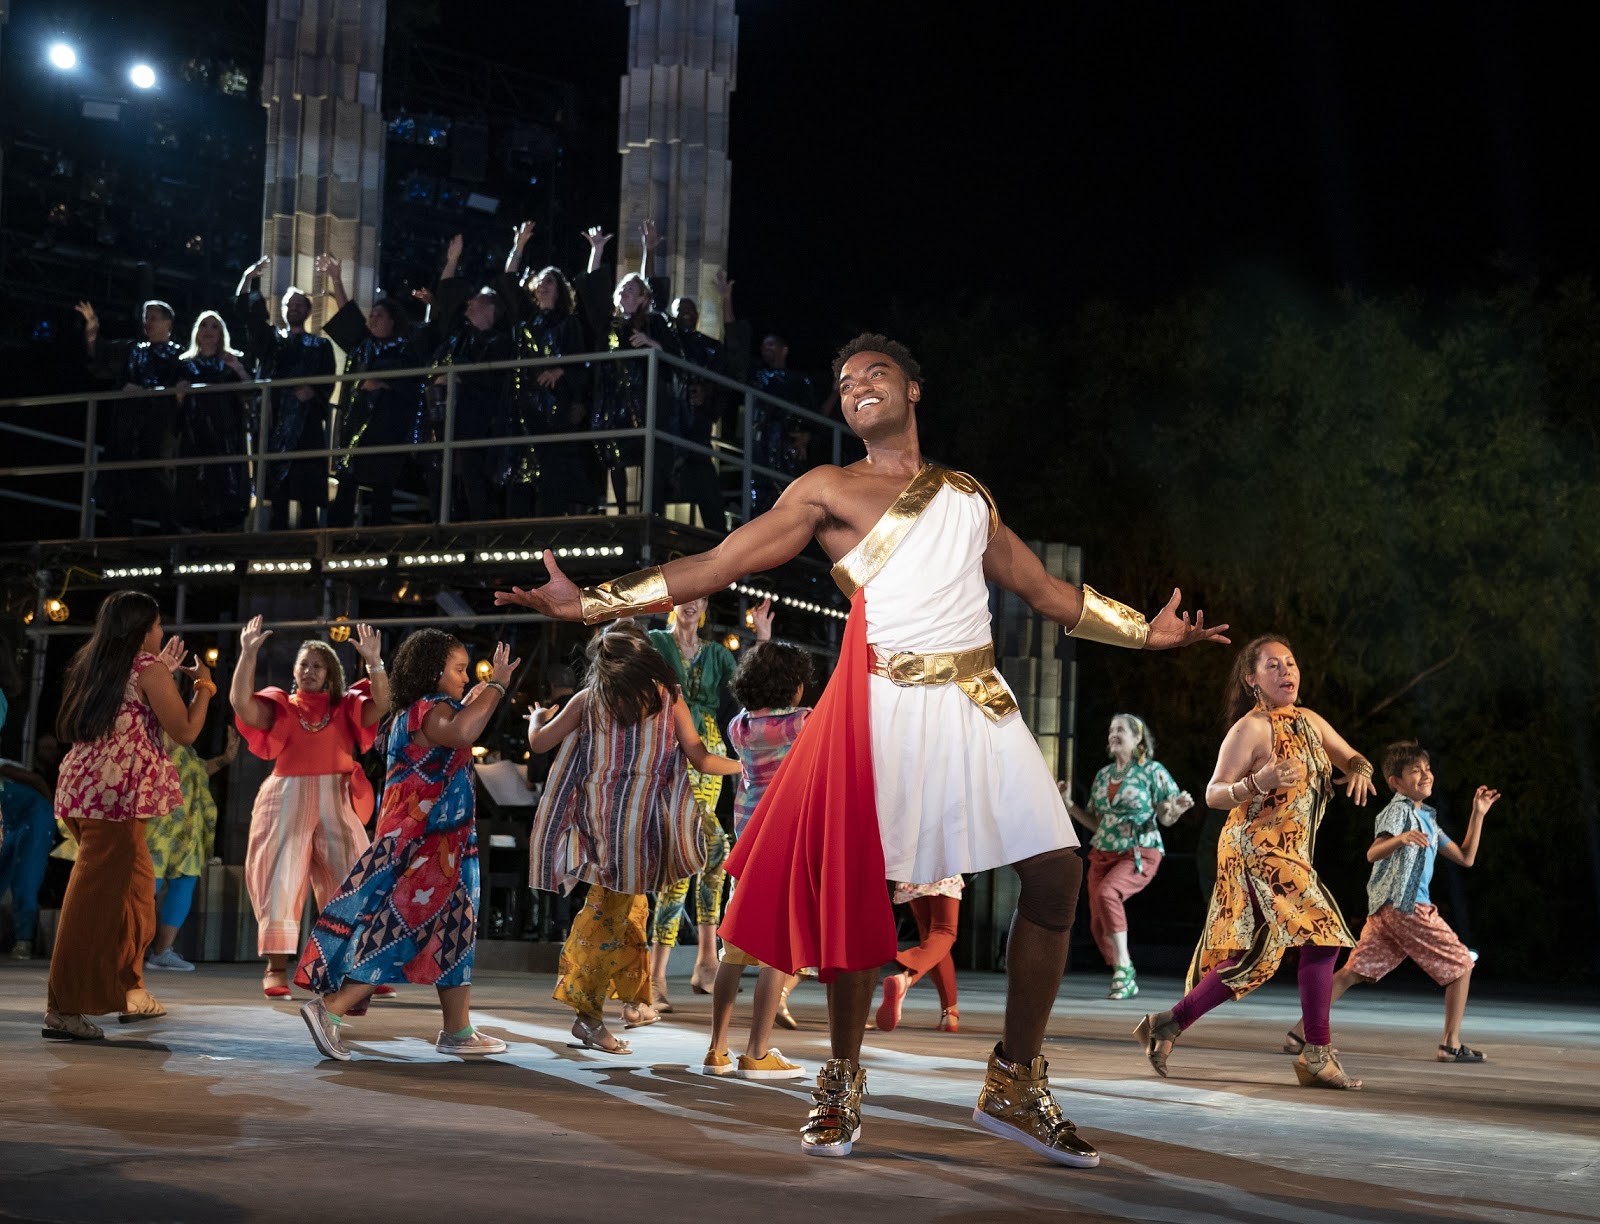 Jelani Alladin (foreground) and the company of The Public Theater’s free Public Works musical adaptation of Hercules, with music by Alan Menken, lyrics by David Zippel, book by Kristoffer Diaz, choreography by Chase Brock, and directed by Lear deBessonet, running at the Delacorte Theater. Photo credit: Joan Marcus.